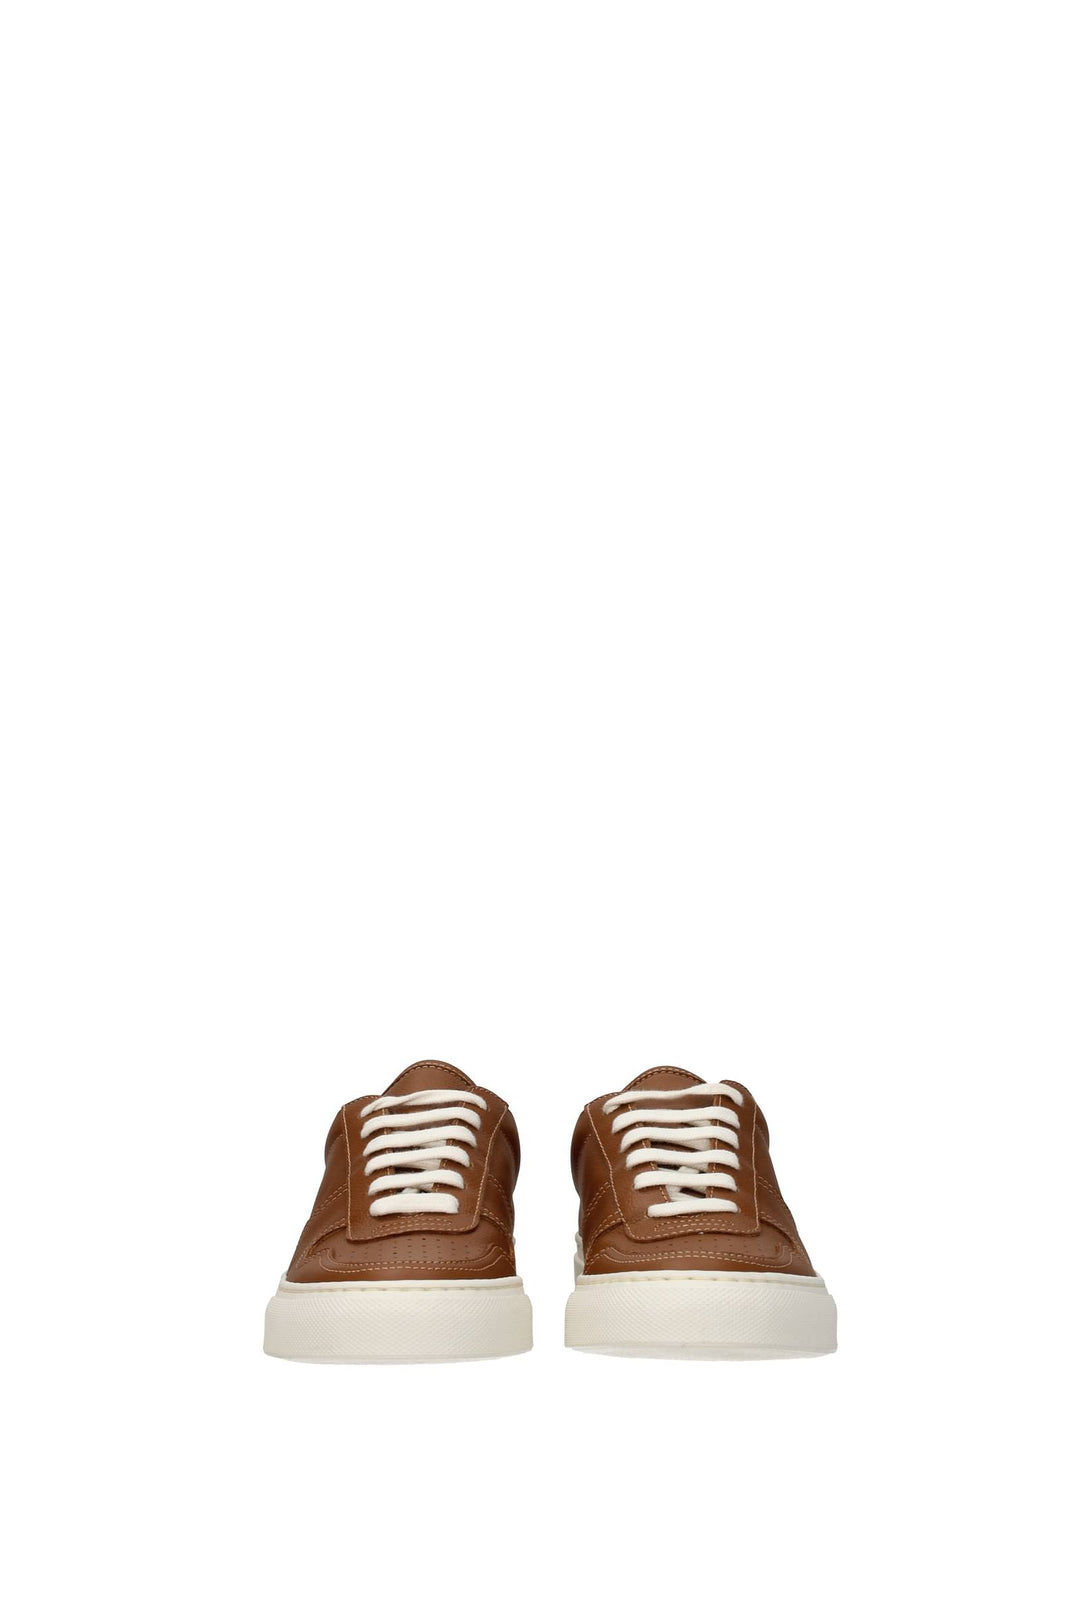 Sneakers Bball Pelle Marrone Tan - Common Projects - Donna